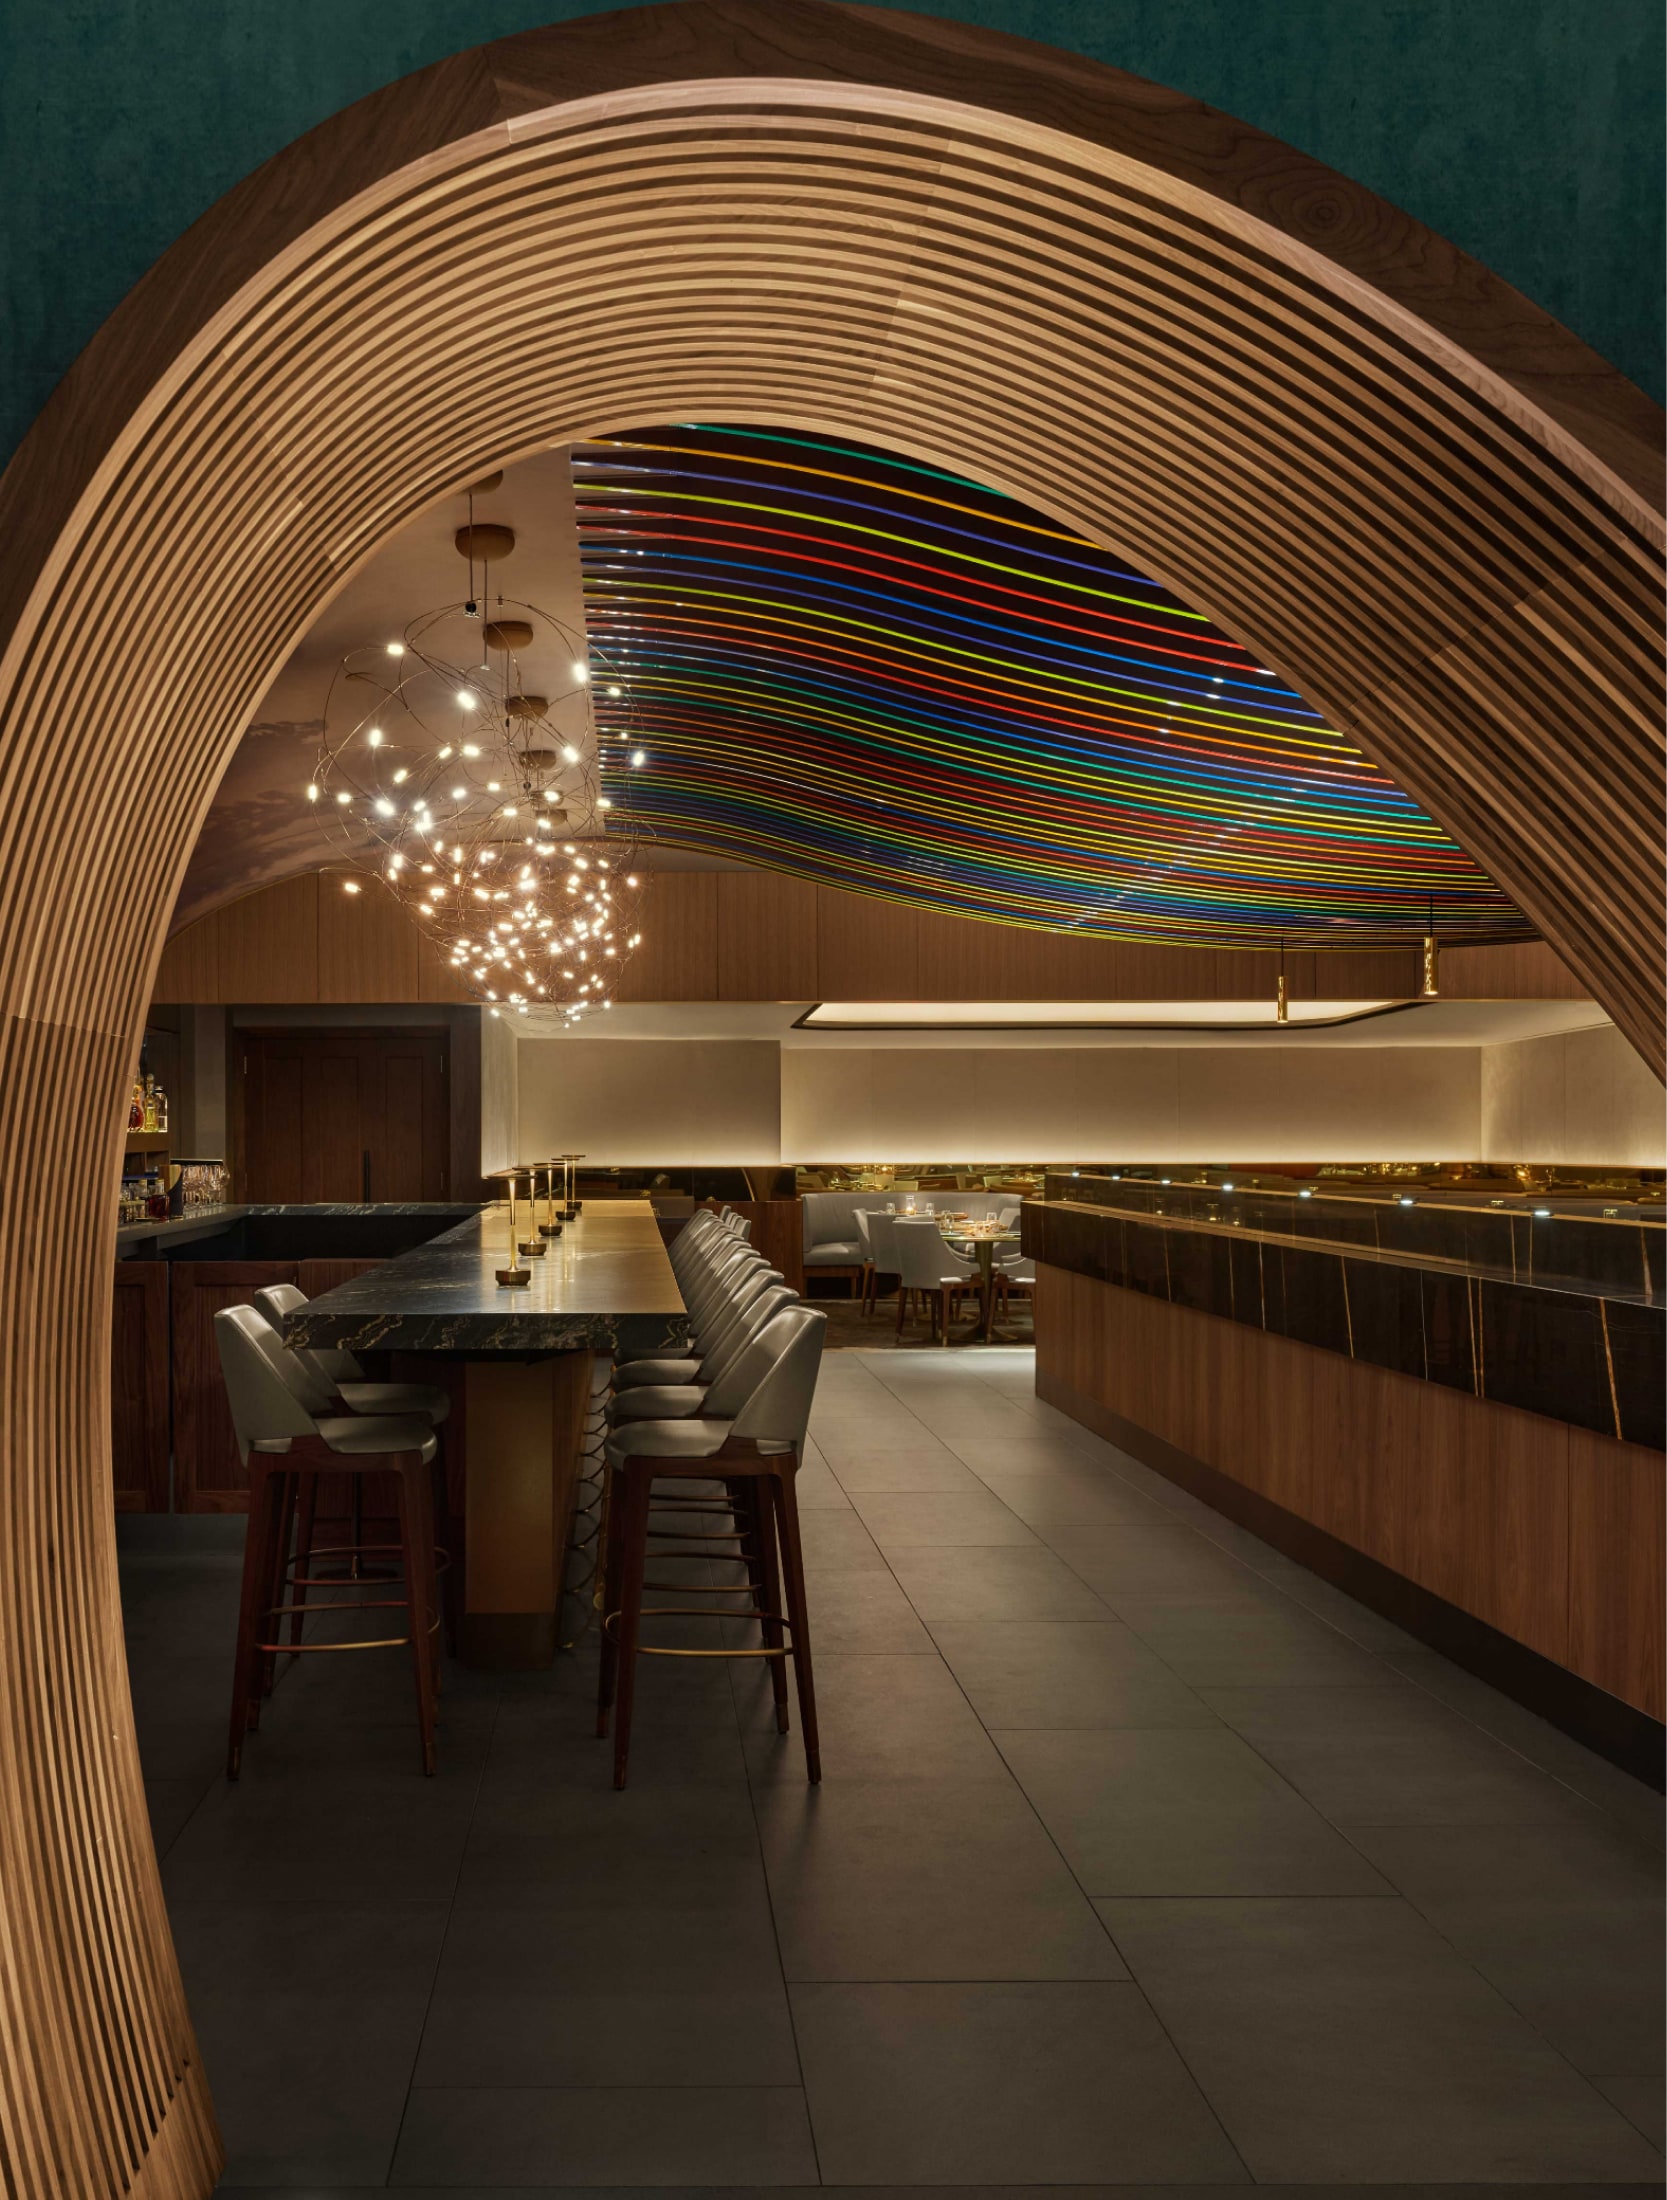 Interior view of the bar and seating area at 53 Restaurant NYC